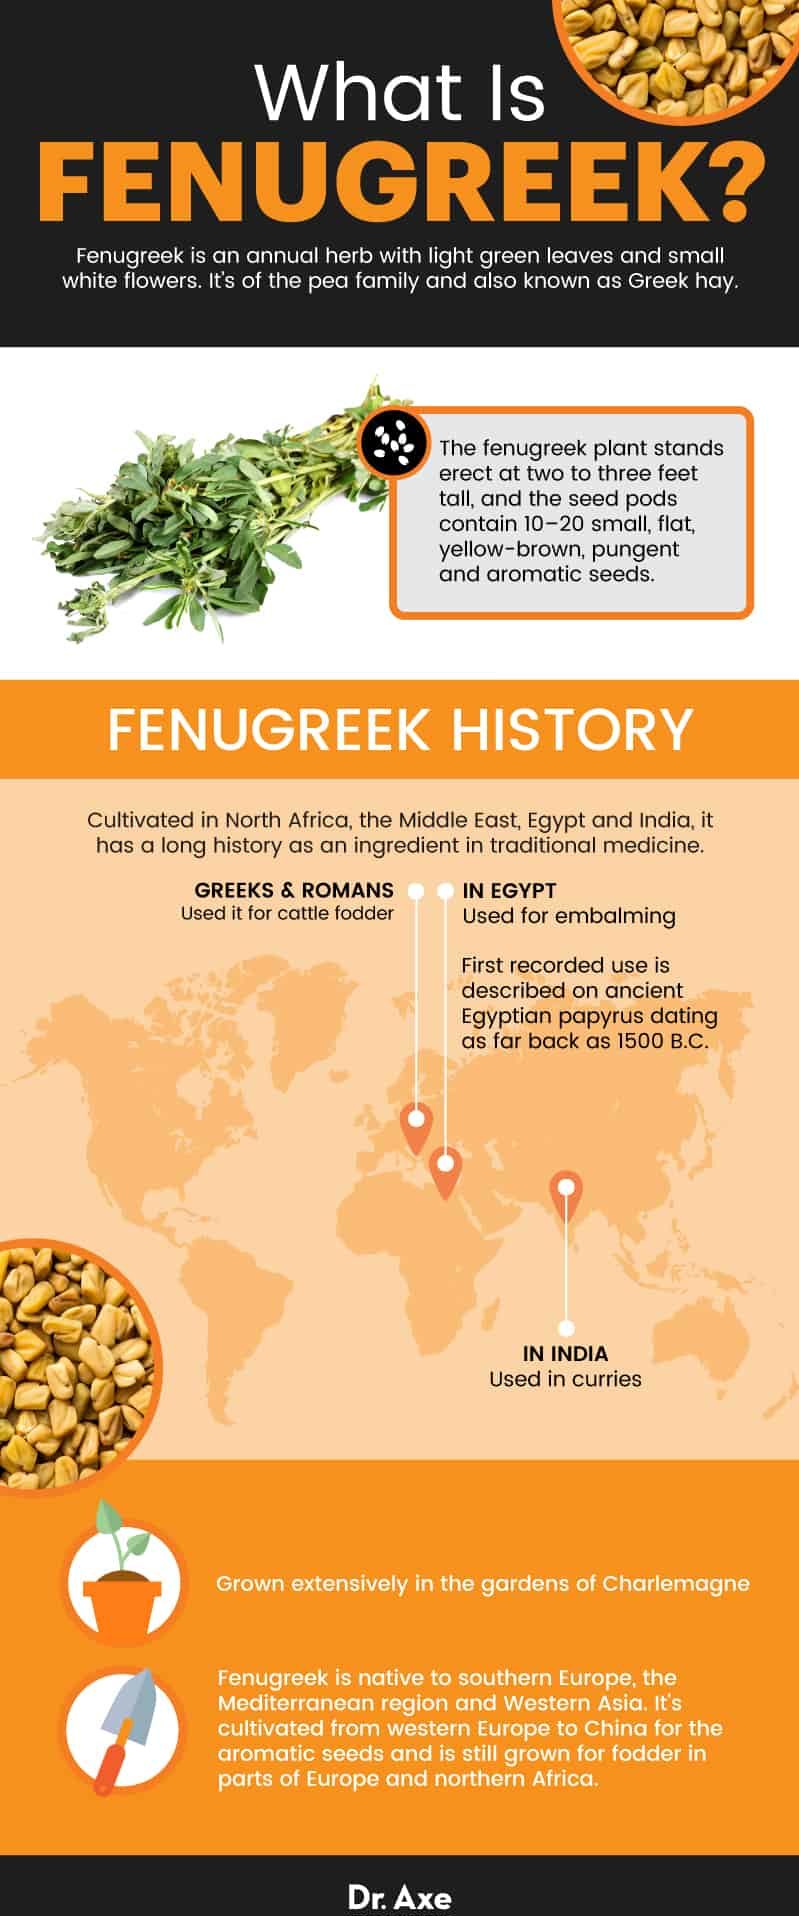 Fenugreek vs Maca: A Comparison of Benefits and Side Effects